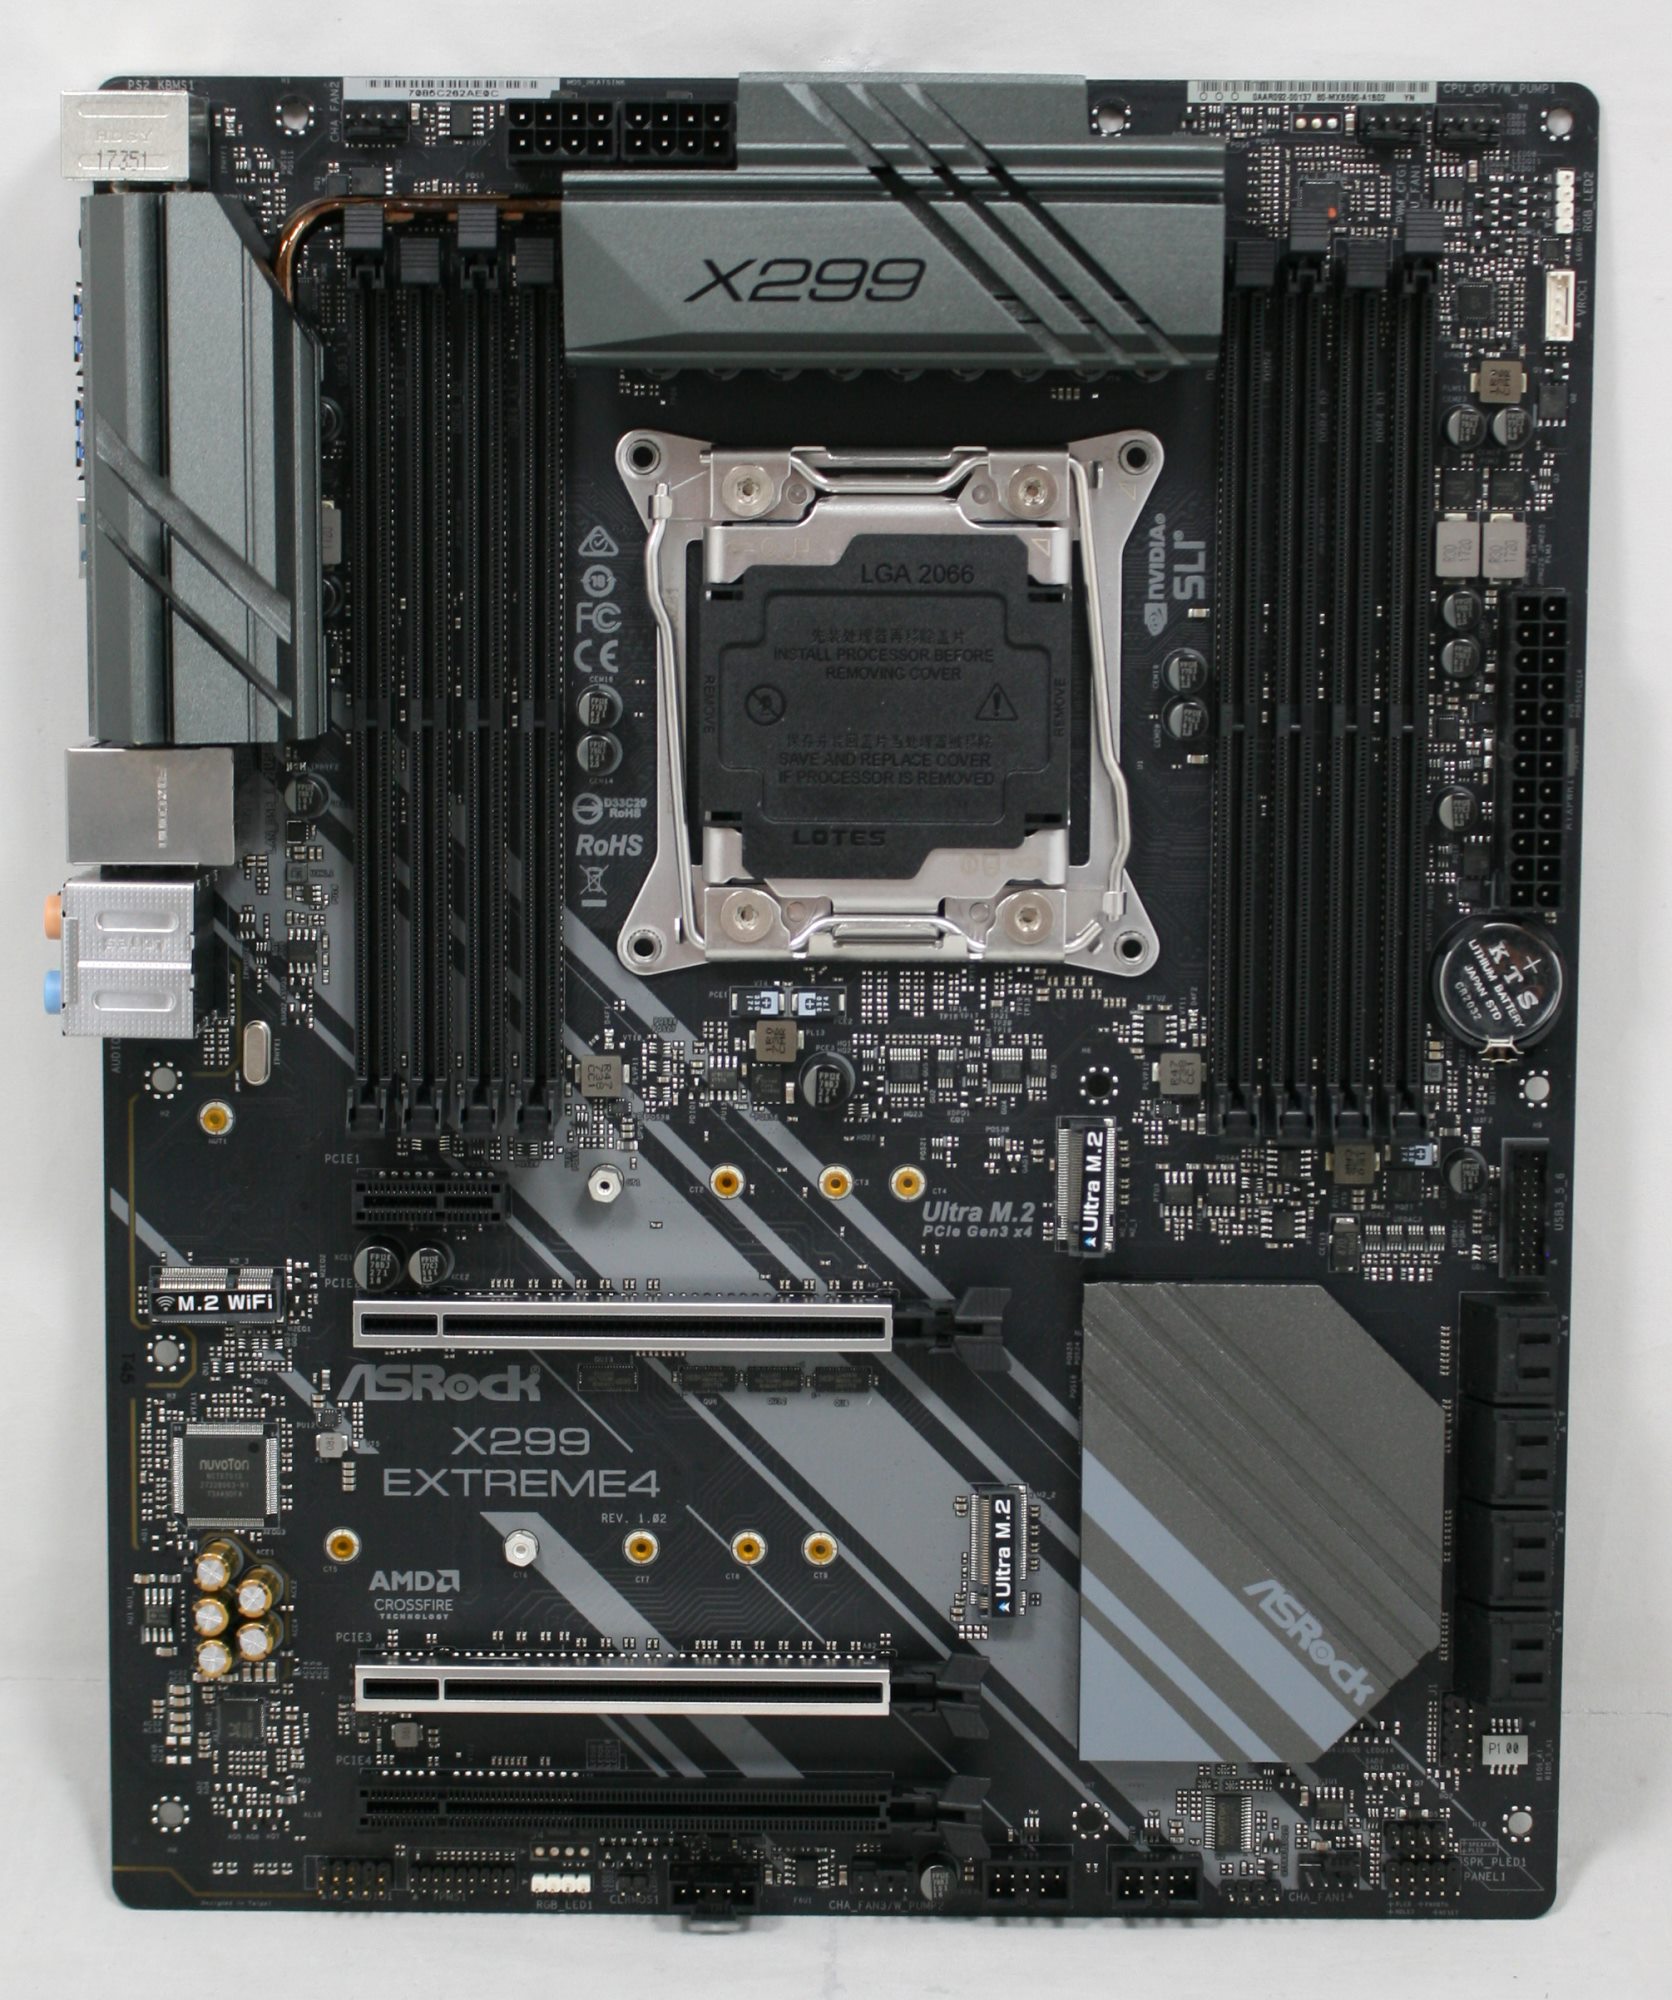 aloud Equipment exception Visual Inspection - The ASRock X299 Extreme4 Motherboard Review: $200 Entry  To HEDT